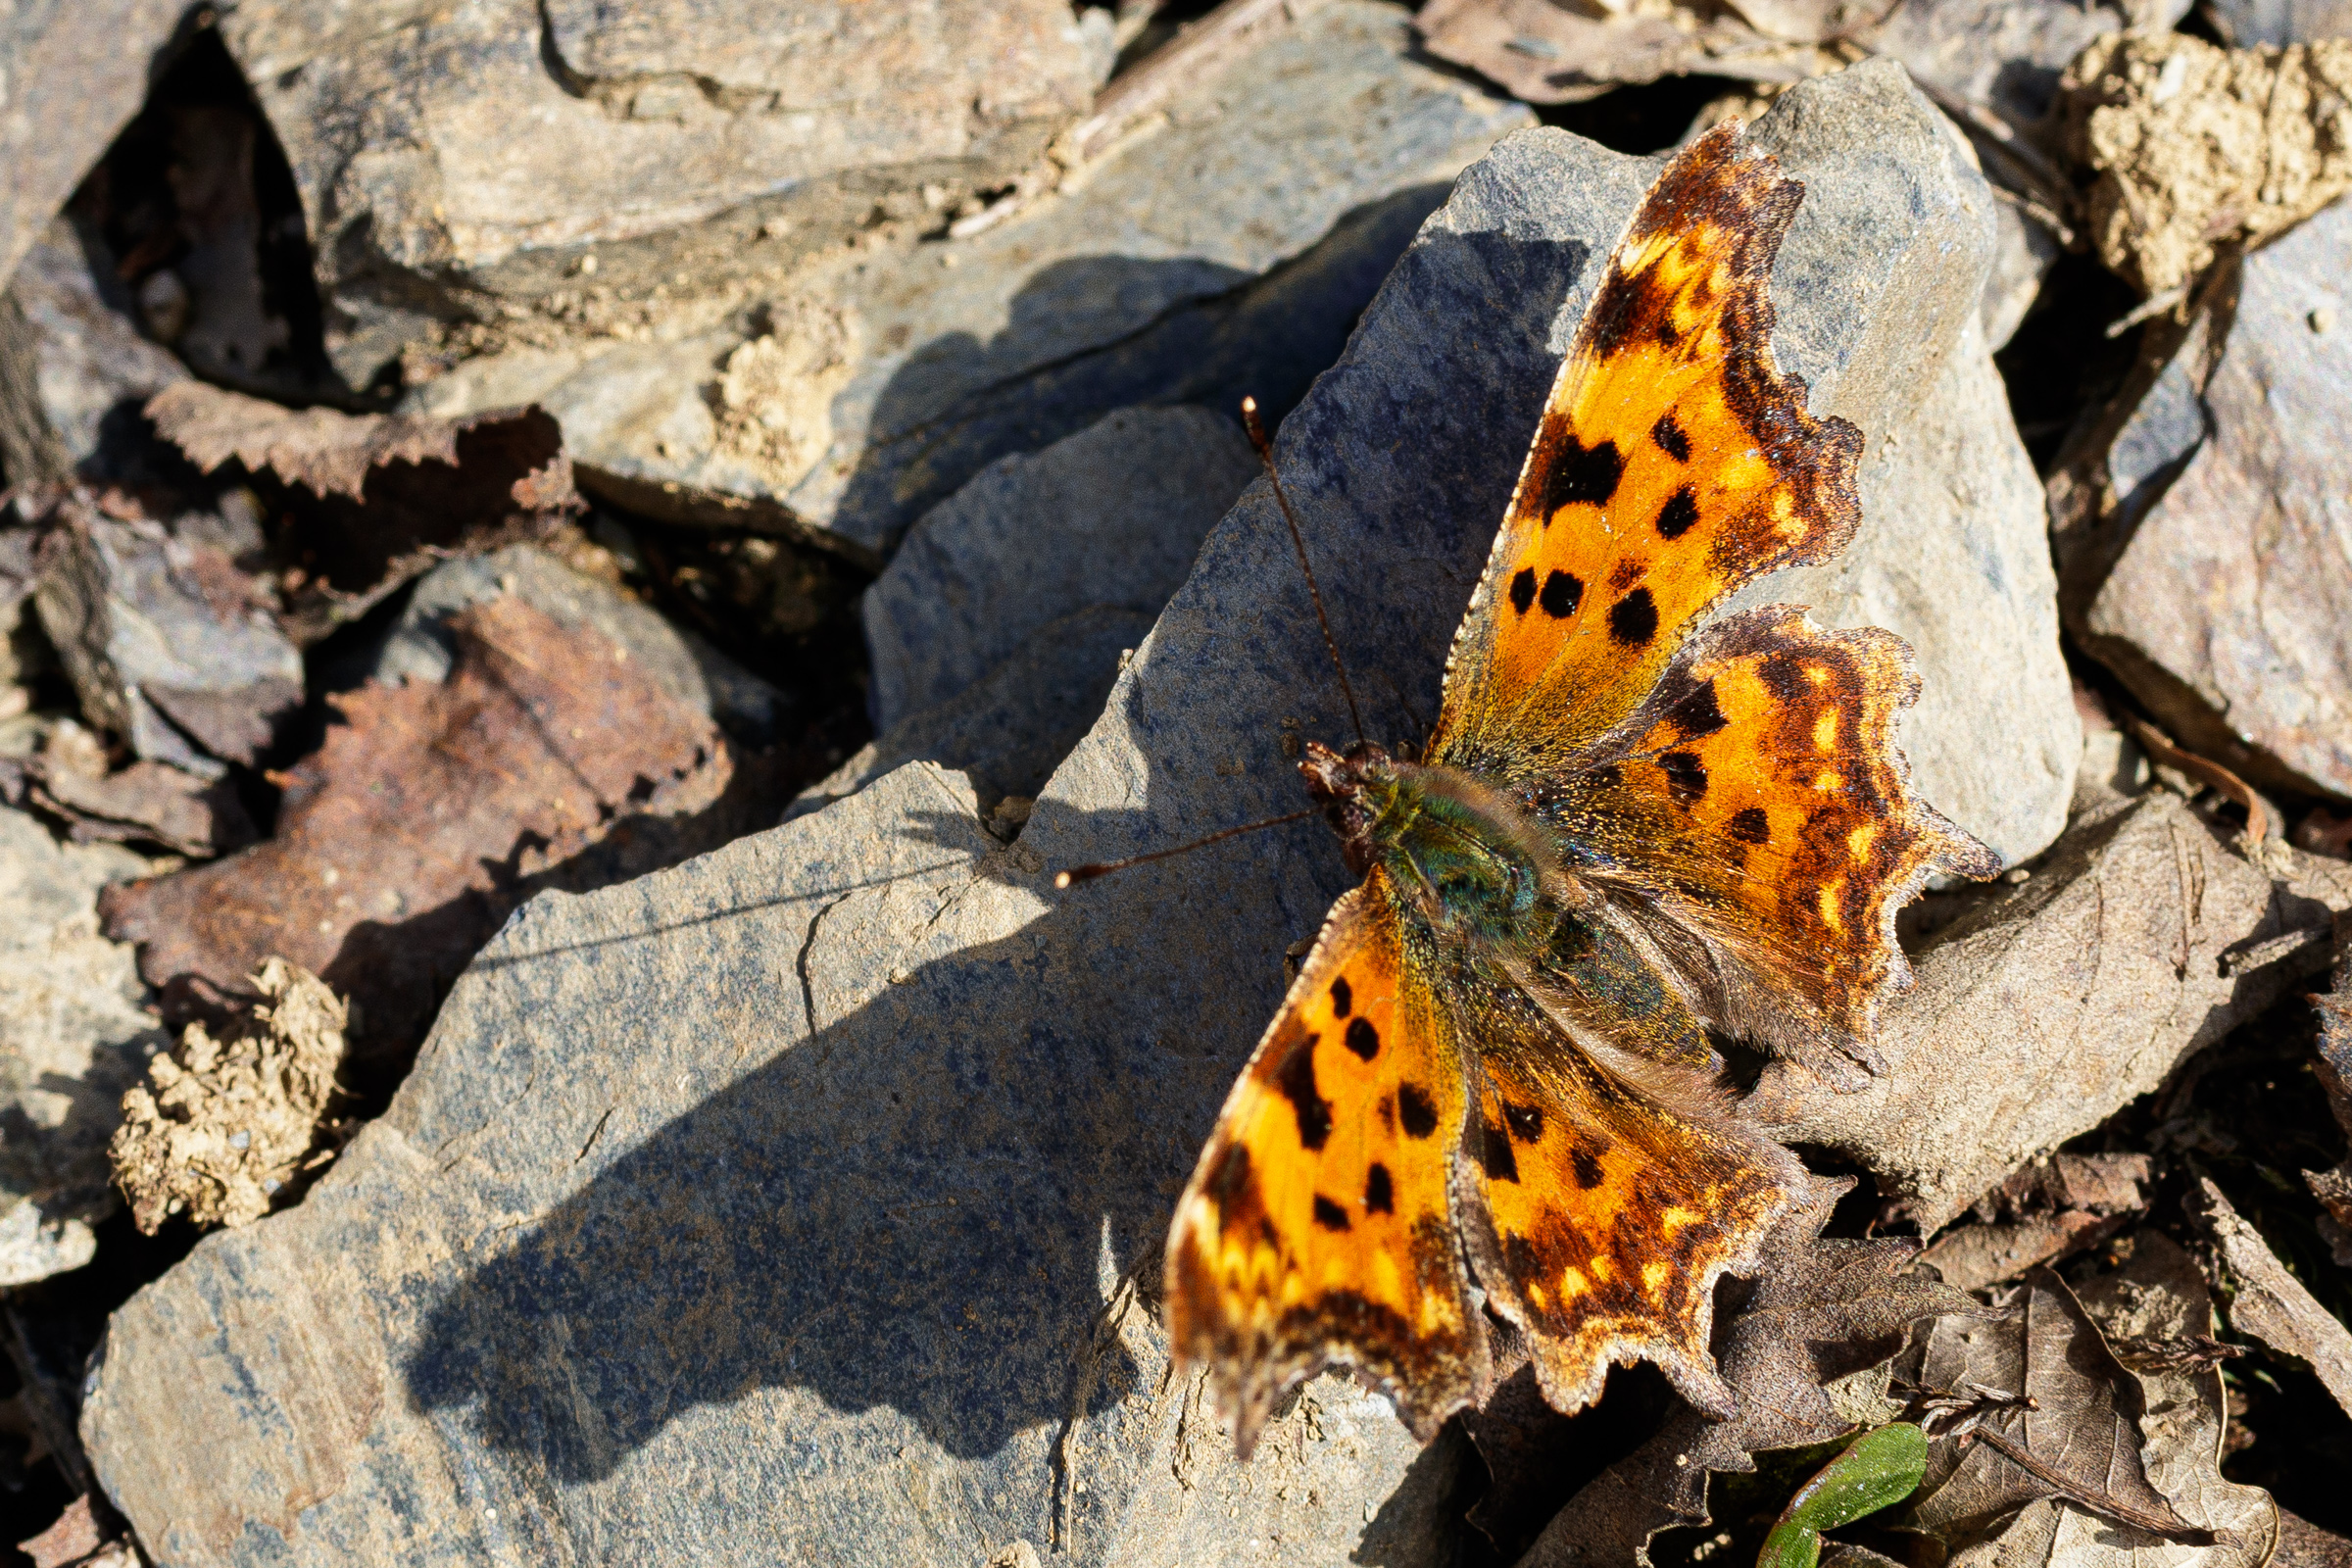 A red spotted butterfly sitting on a rock.